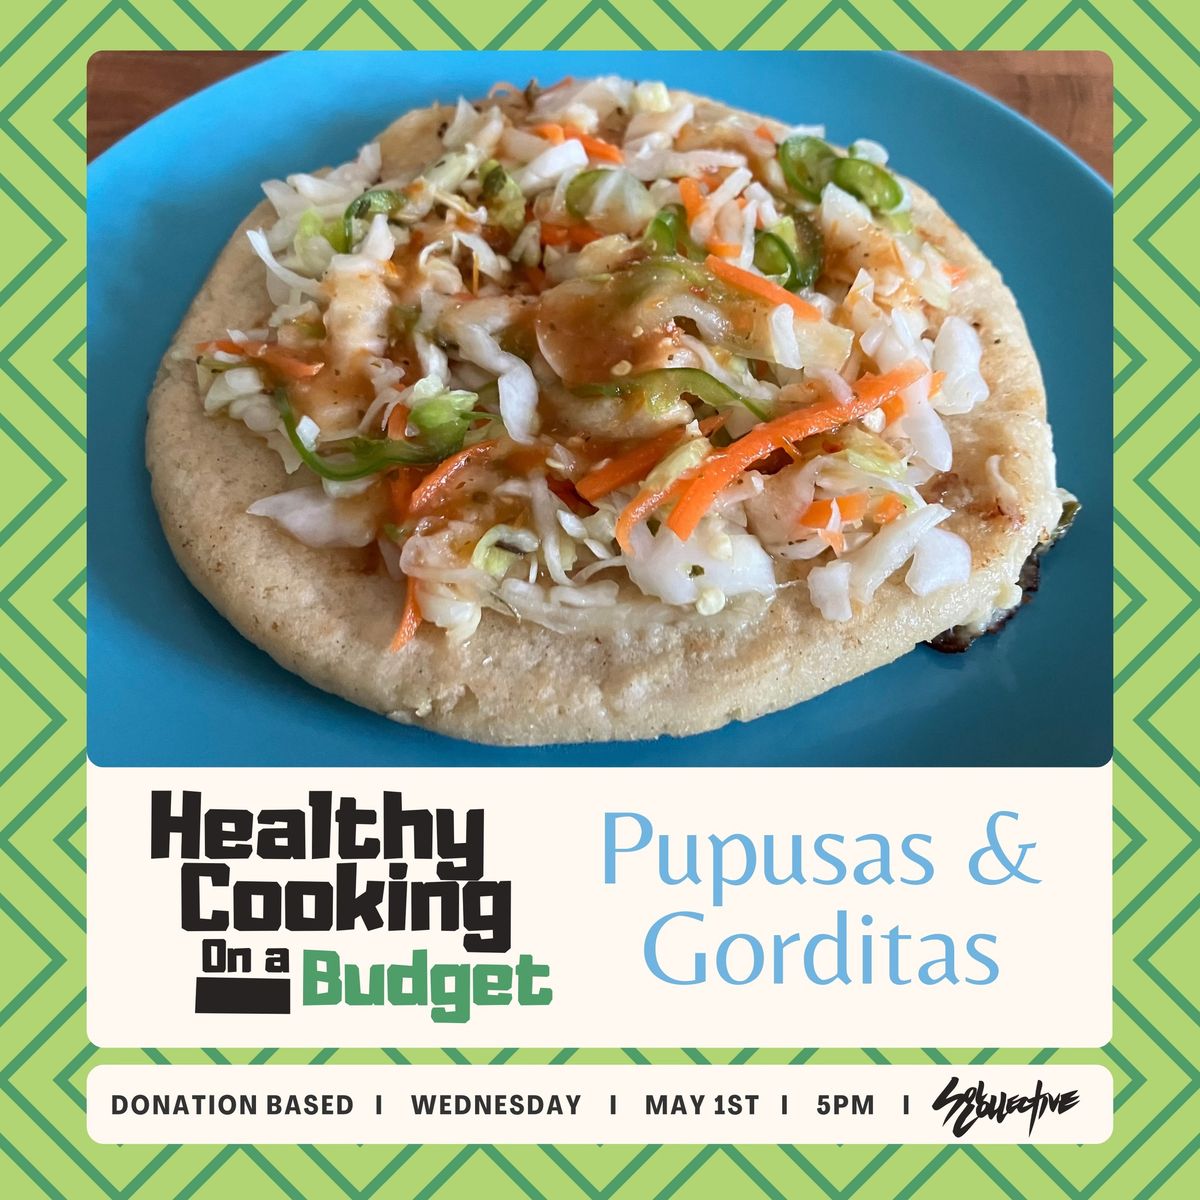 Healthy Cooking on a Budget: Pupusas and Gorditas